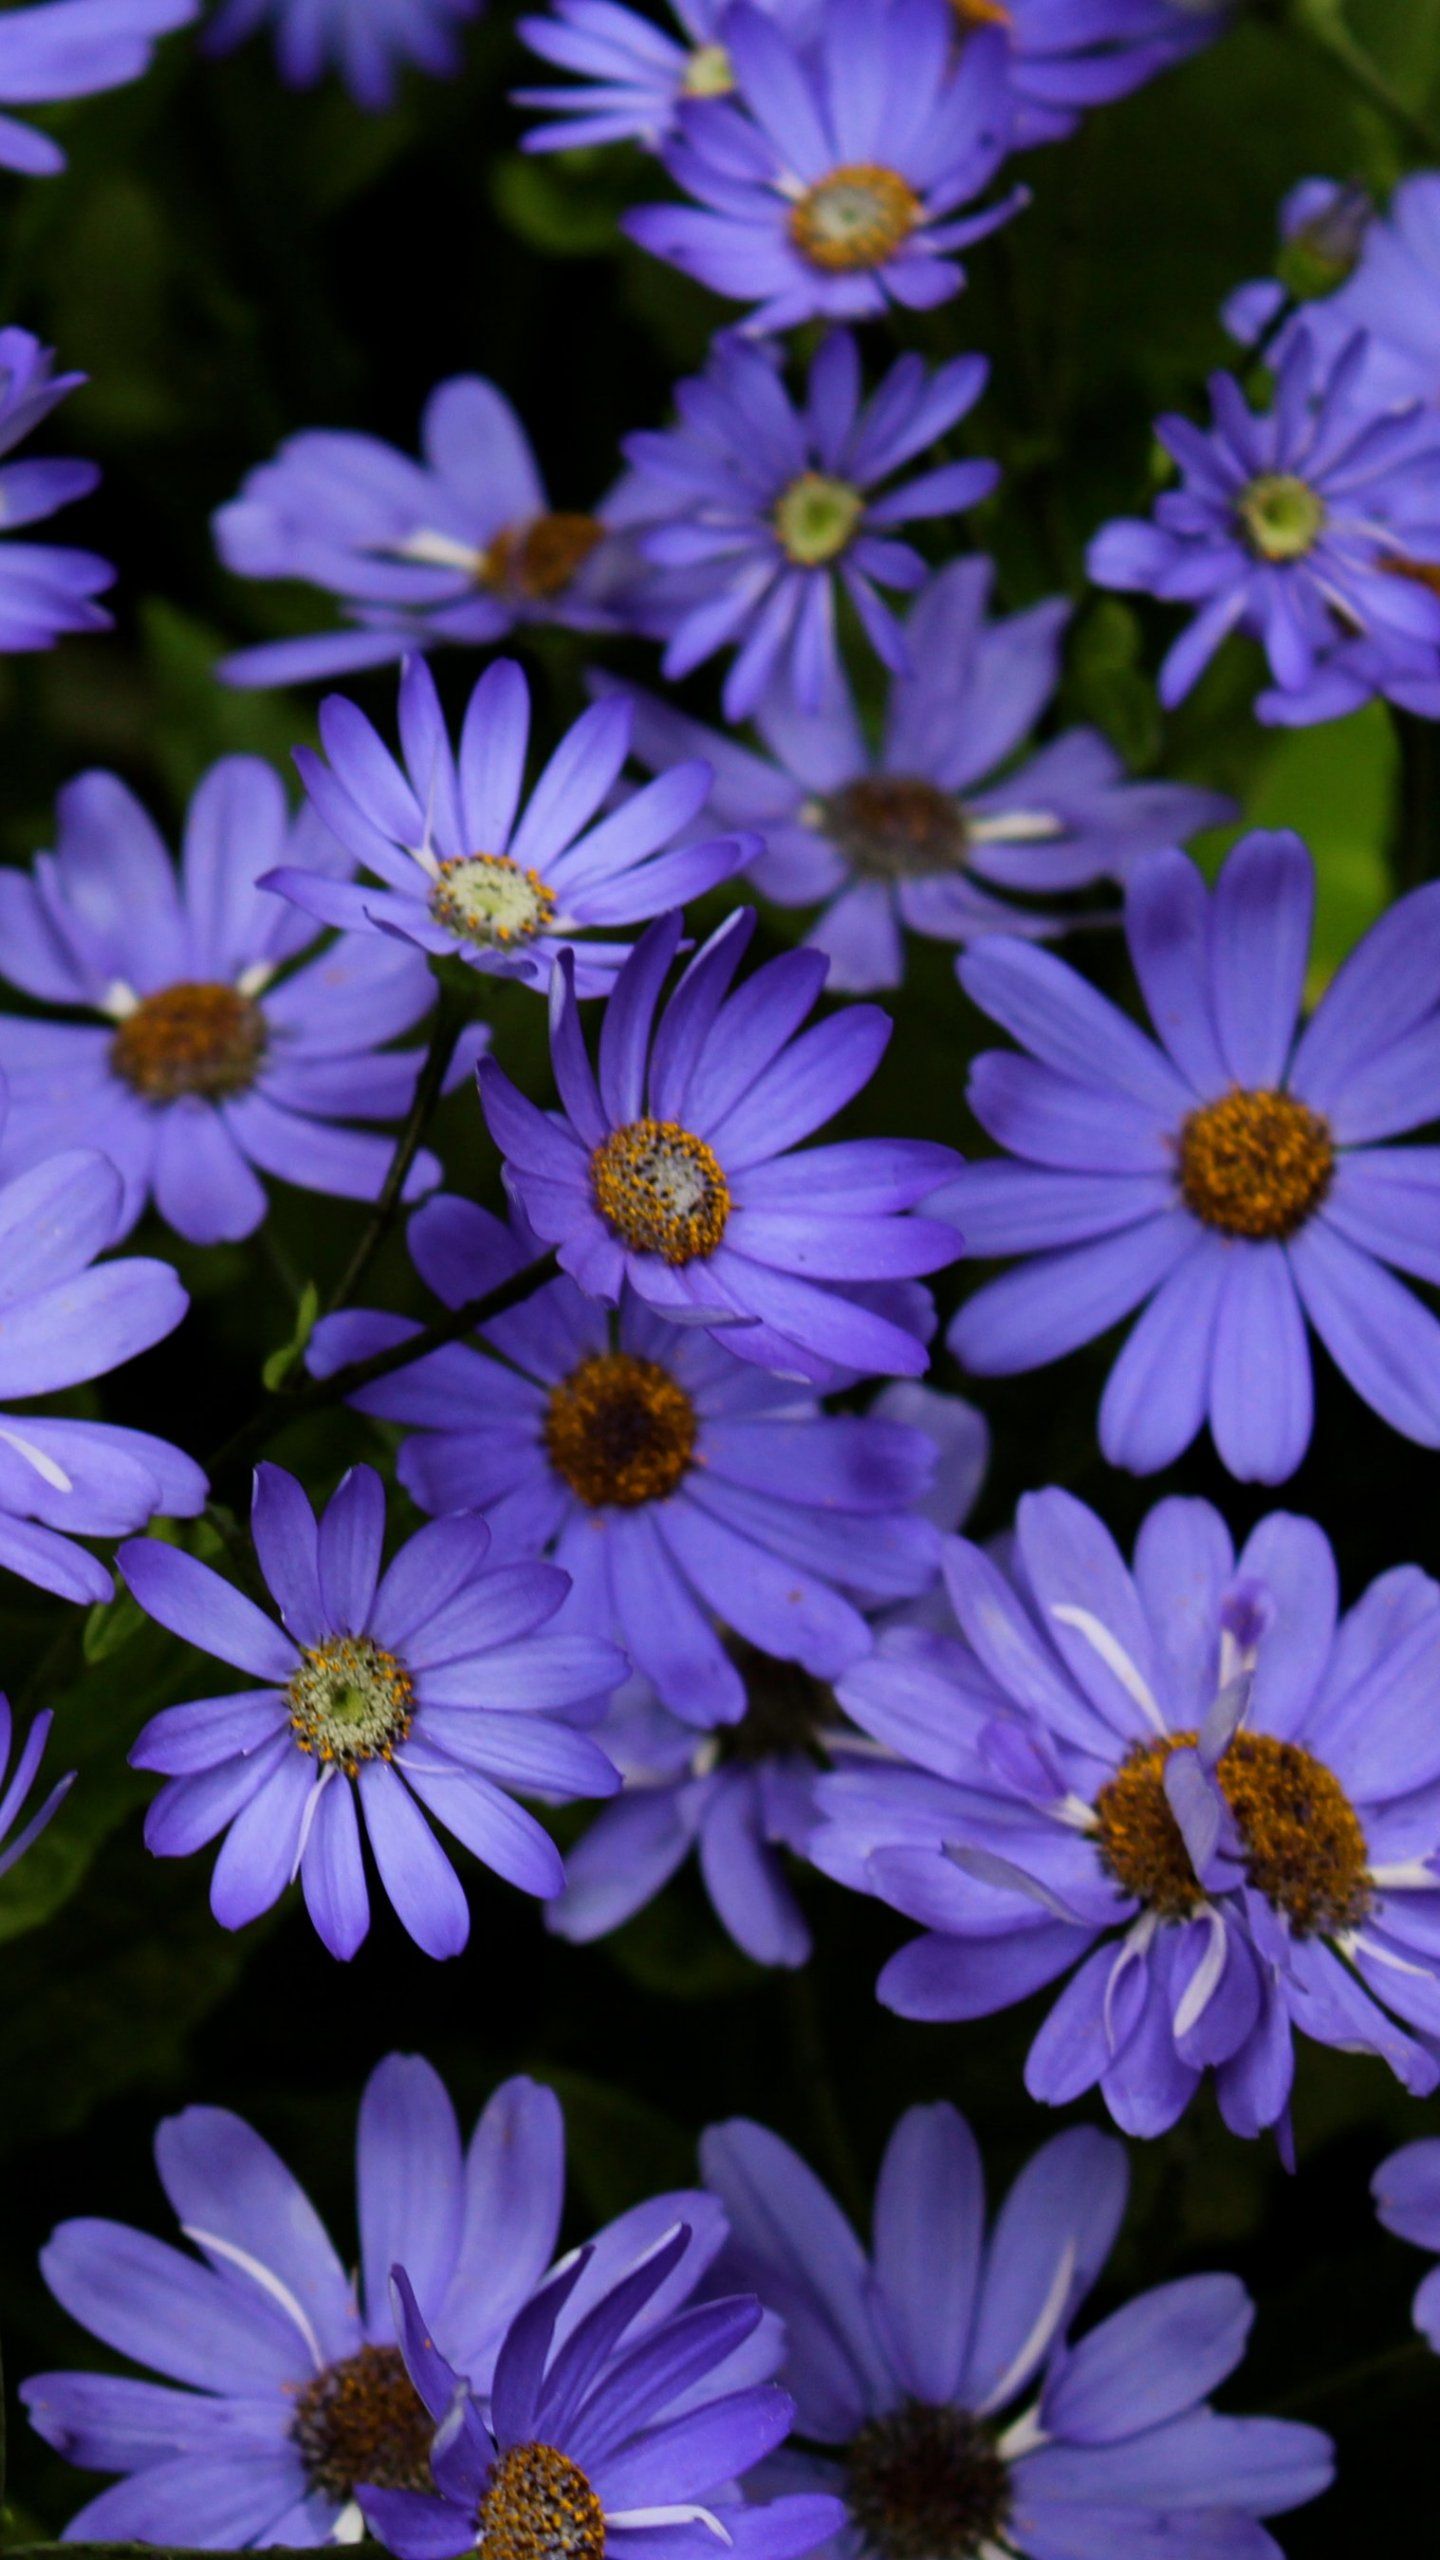 A group of purple flowers with green leaves in the background. - Daisy